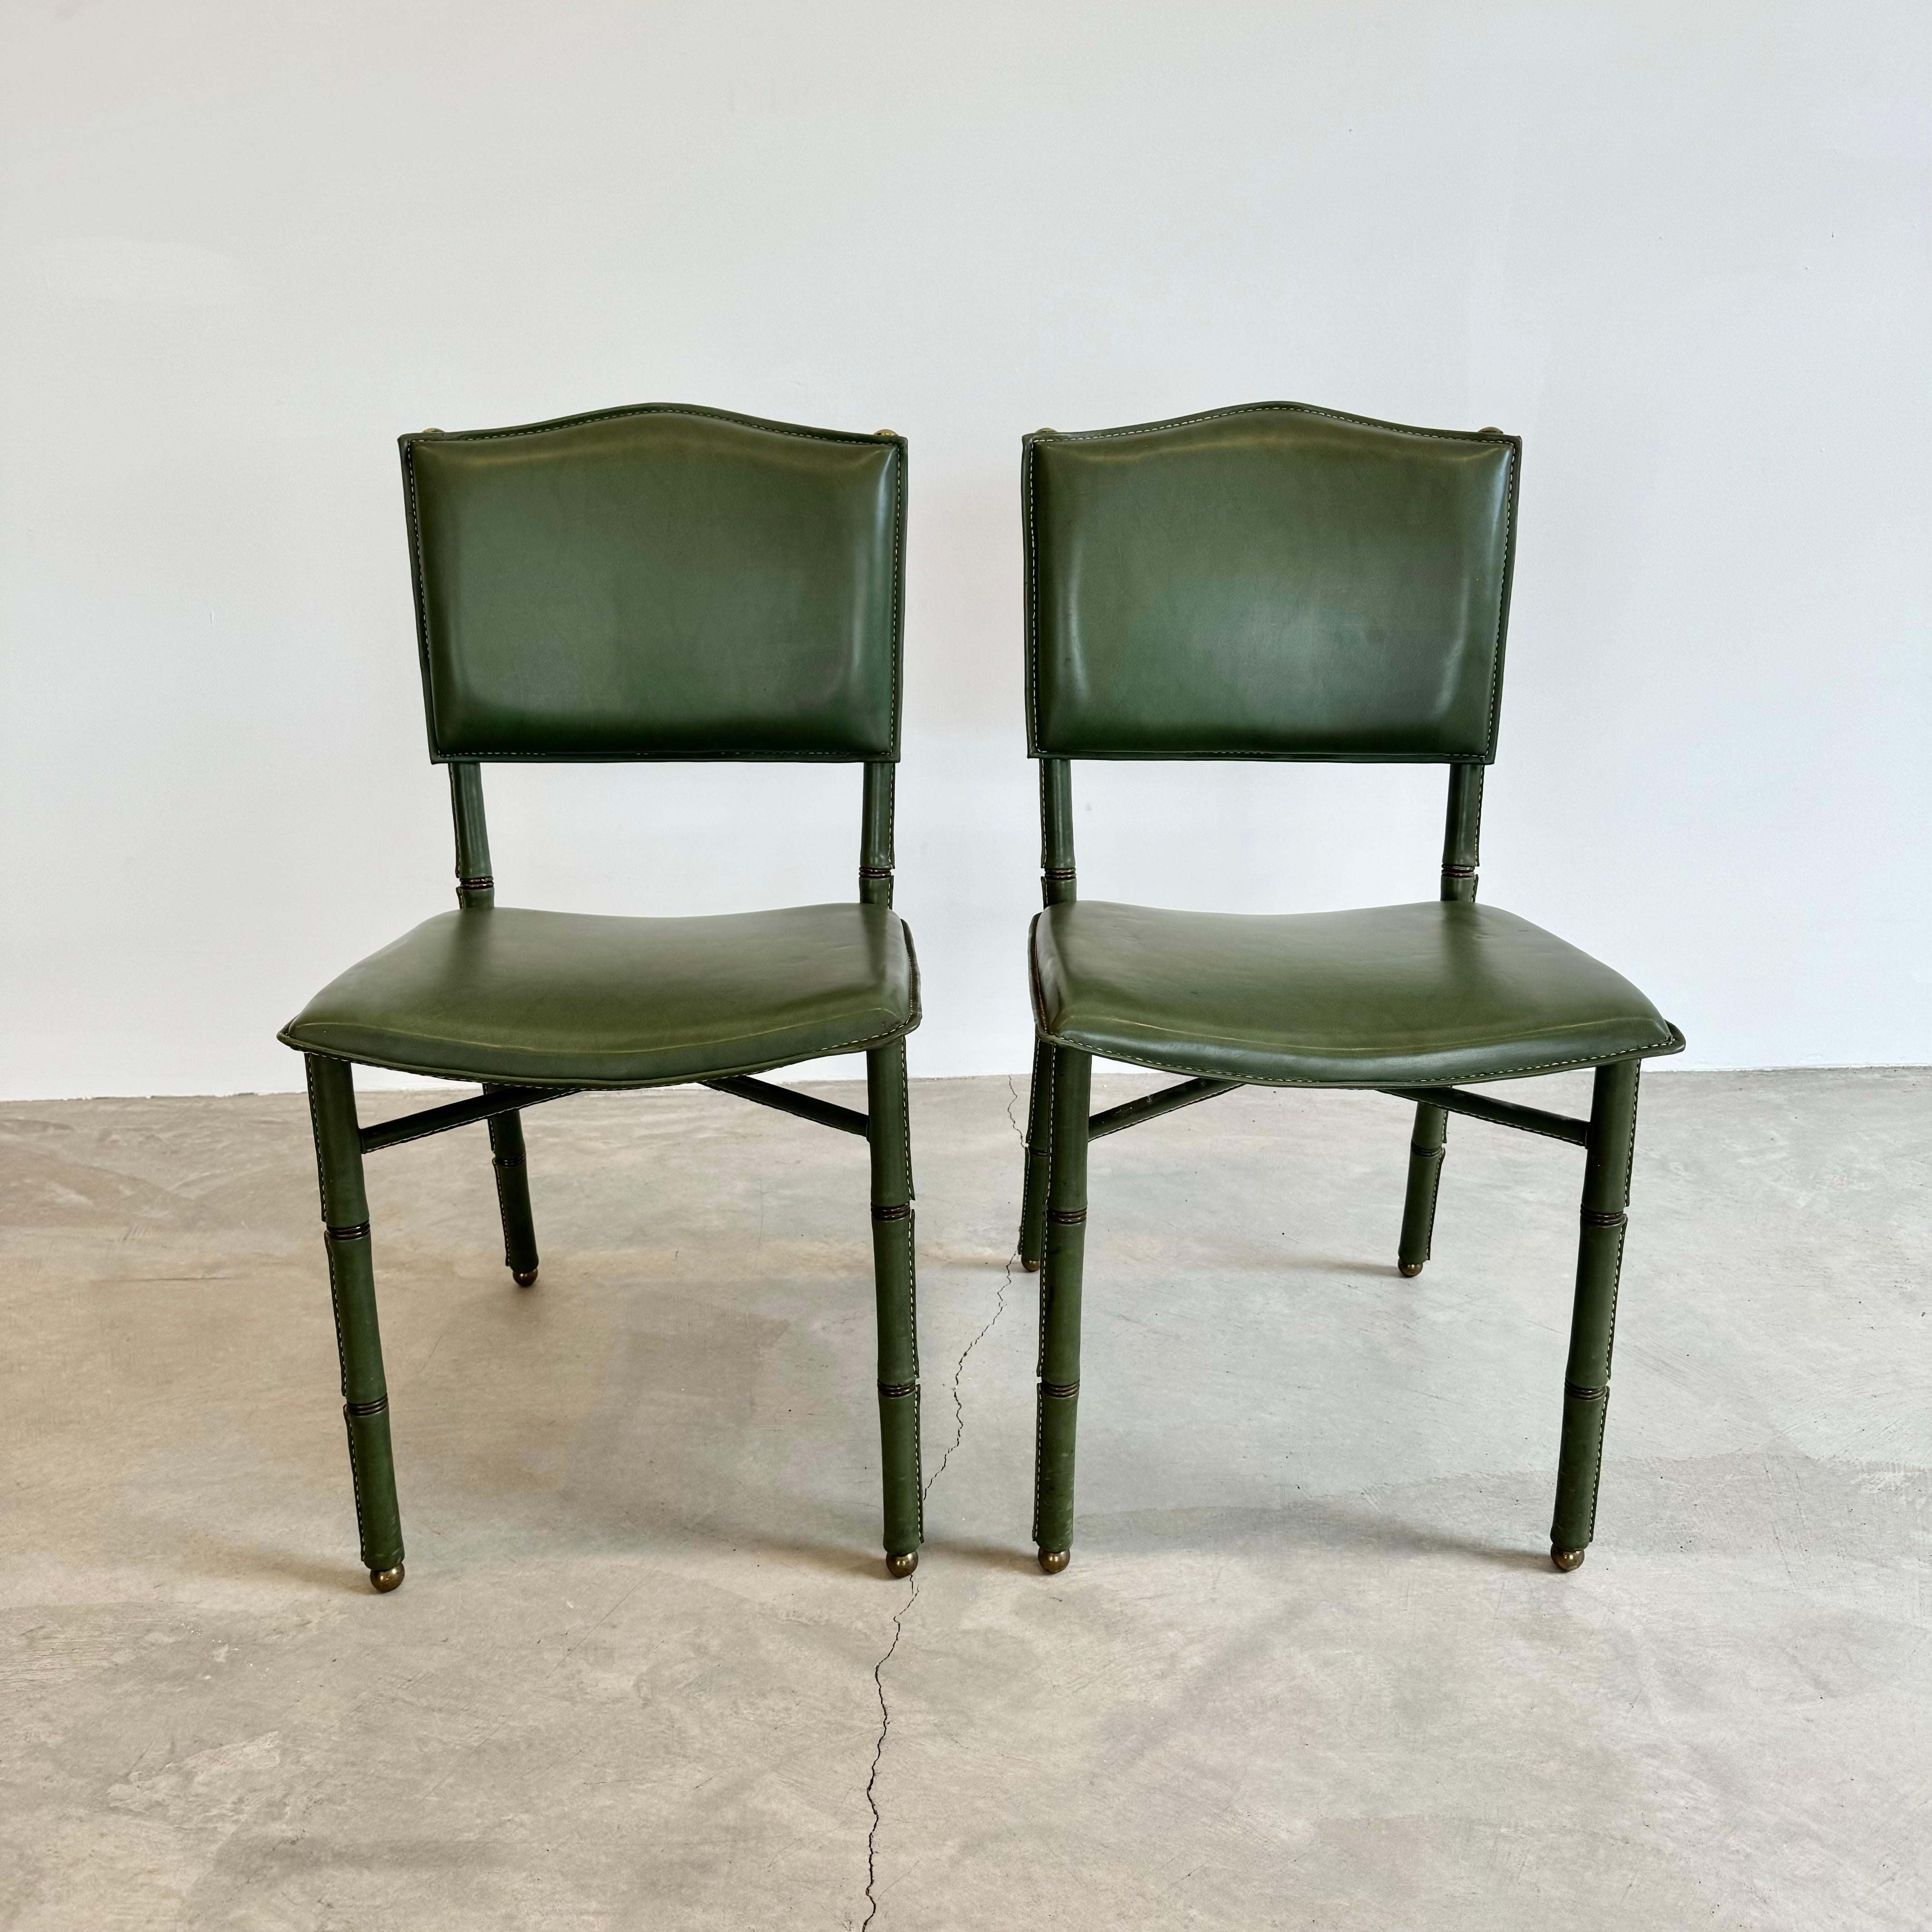 French Jacques Adnet Green Leather Chairs, Circa 1950s, France For Sale